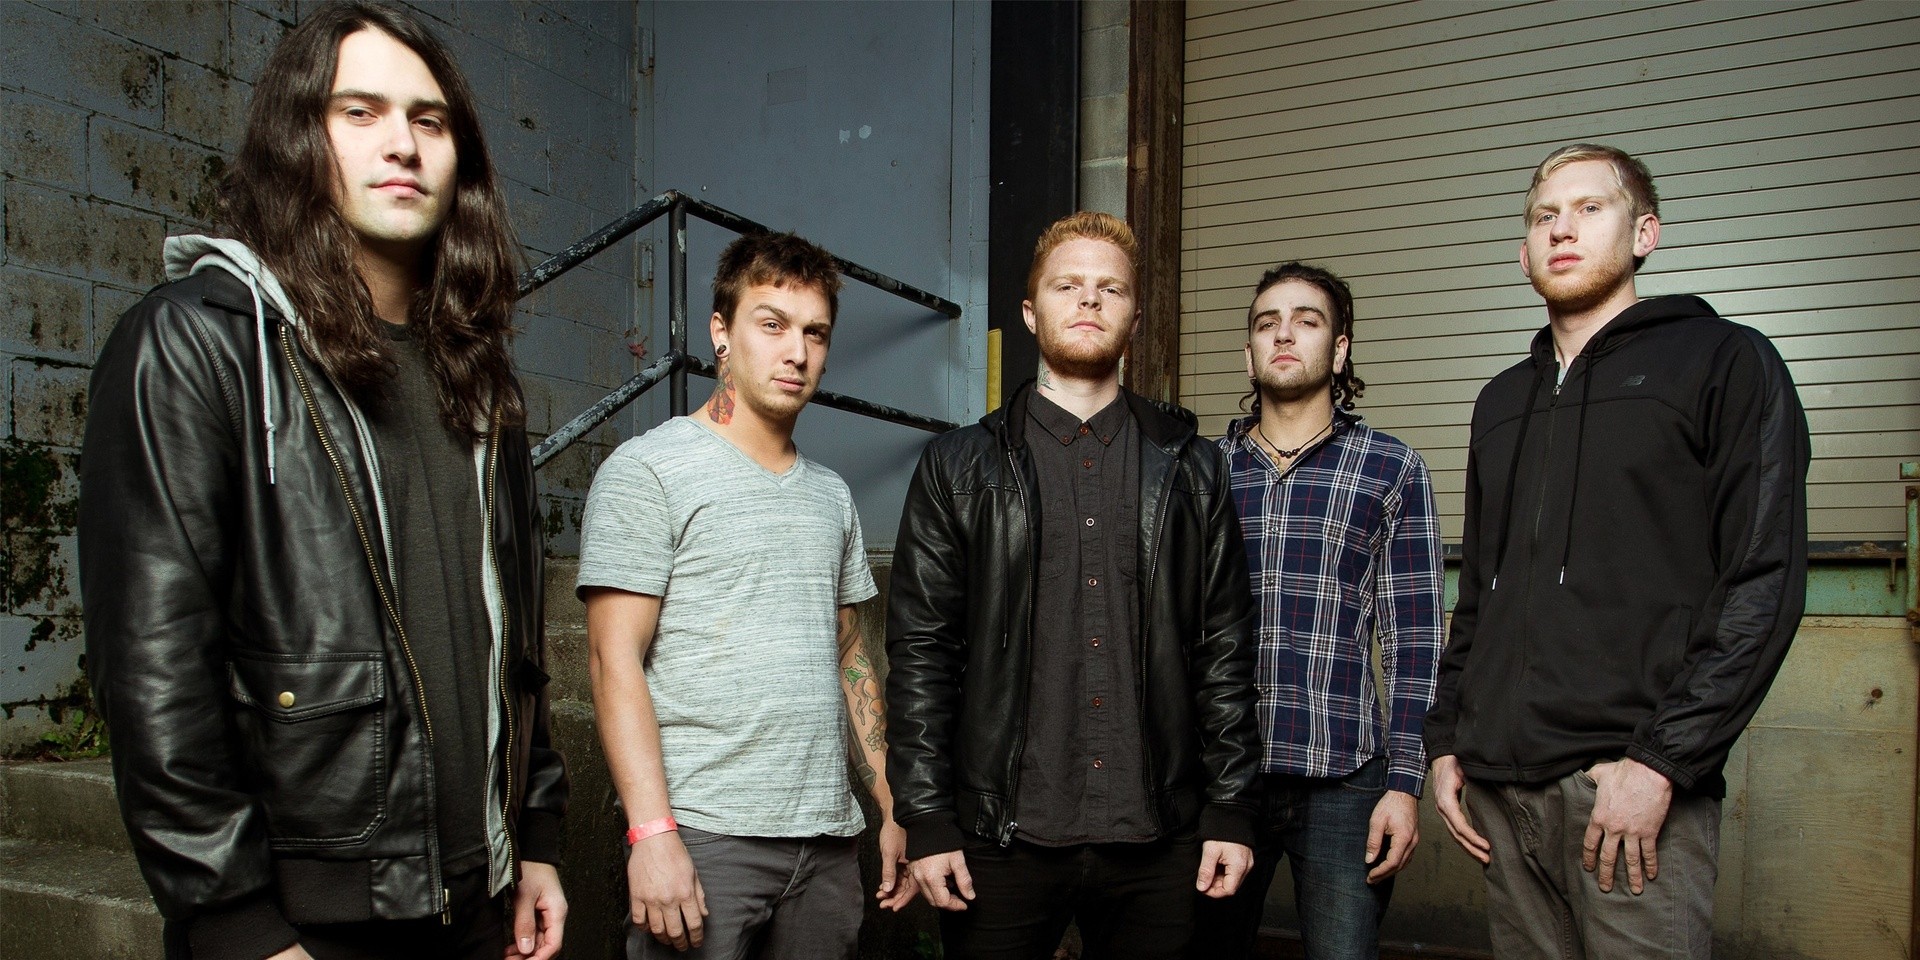 American metalcore band Born of Osiris cancels Singapore gig due to immigration issues